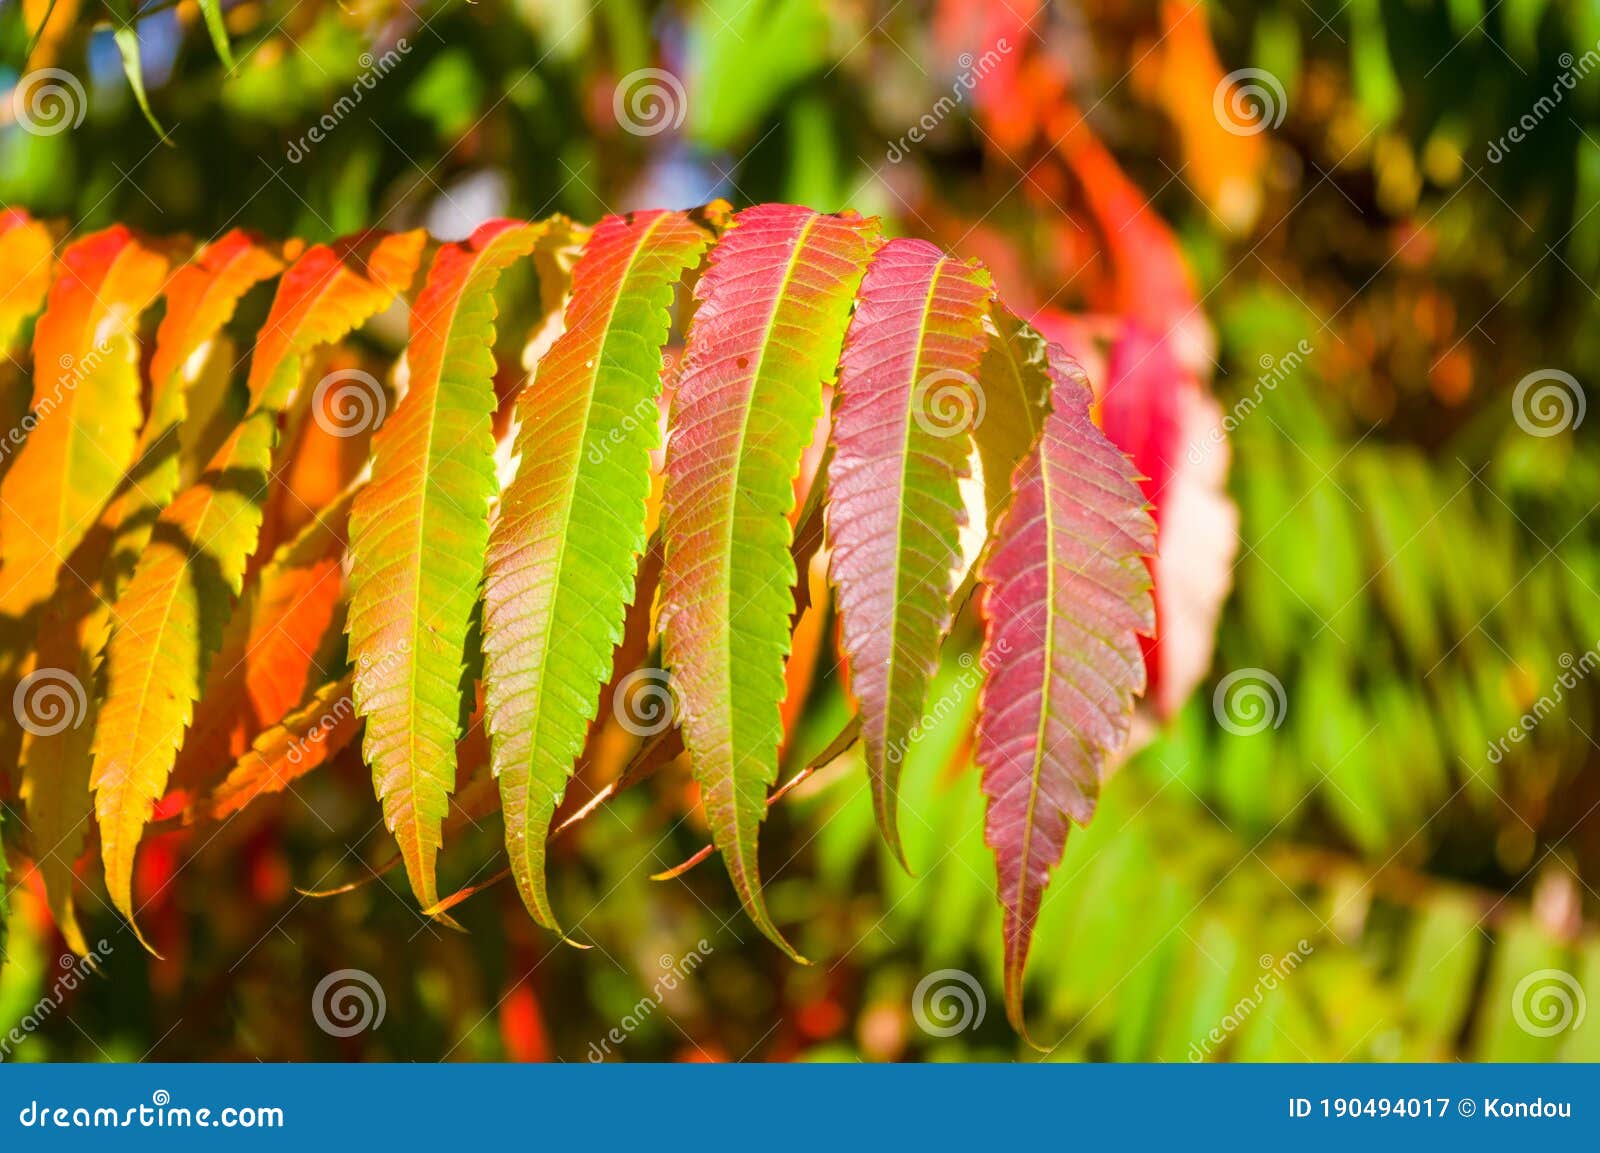 autumn red and yellow colors of the rhus typhina, staghorn sumac, anacardiaceae, leaves of sumac on blue sky